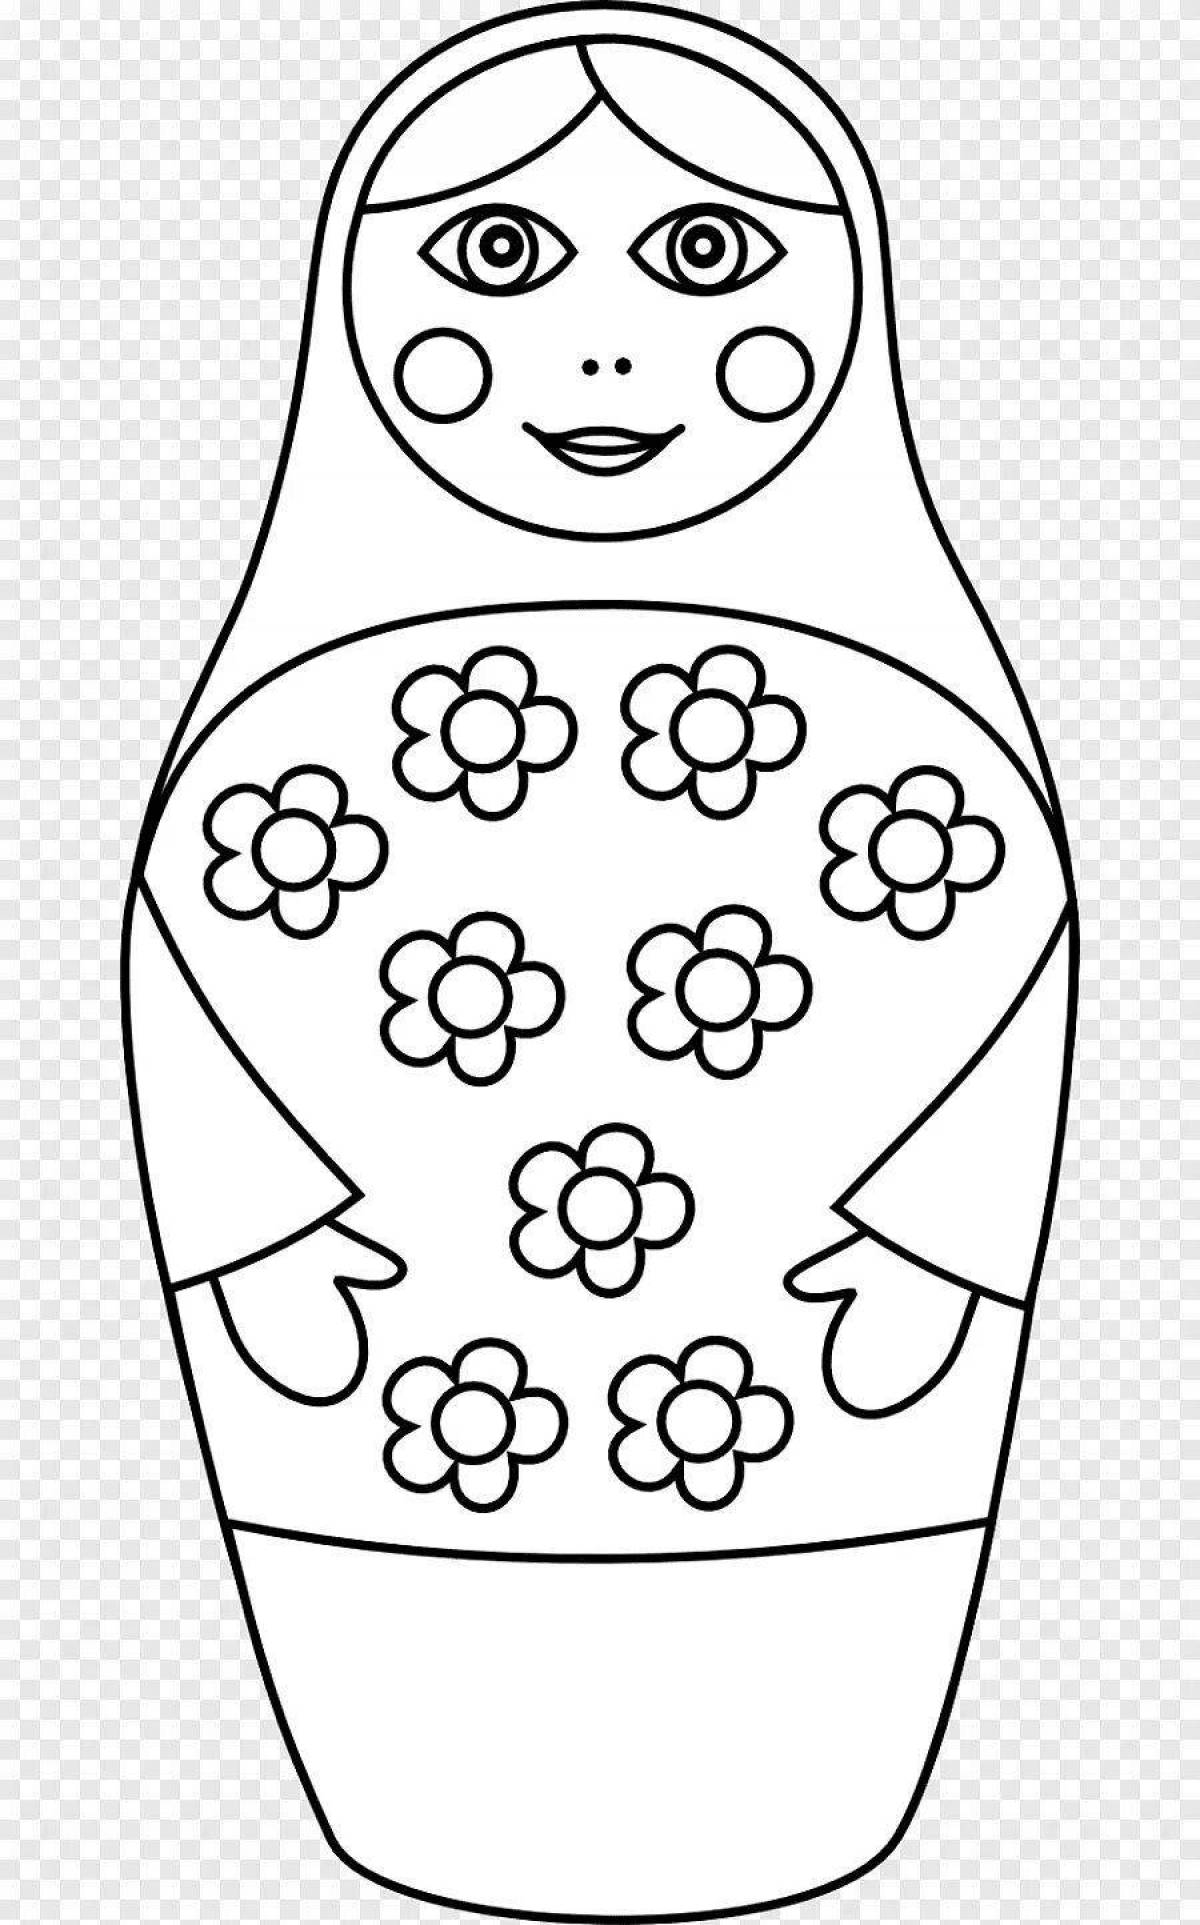 Amazing coloring book with matryoshka pattern for kids 5-6 years old